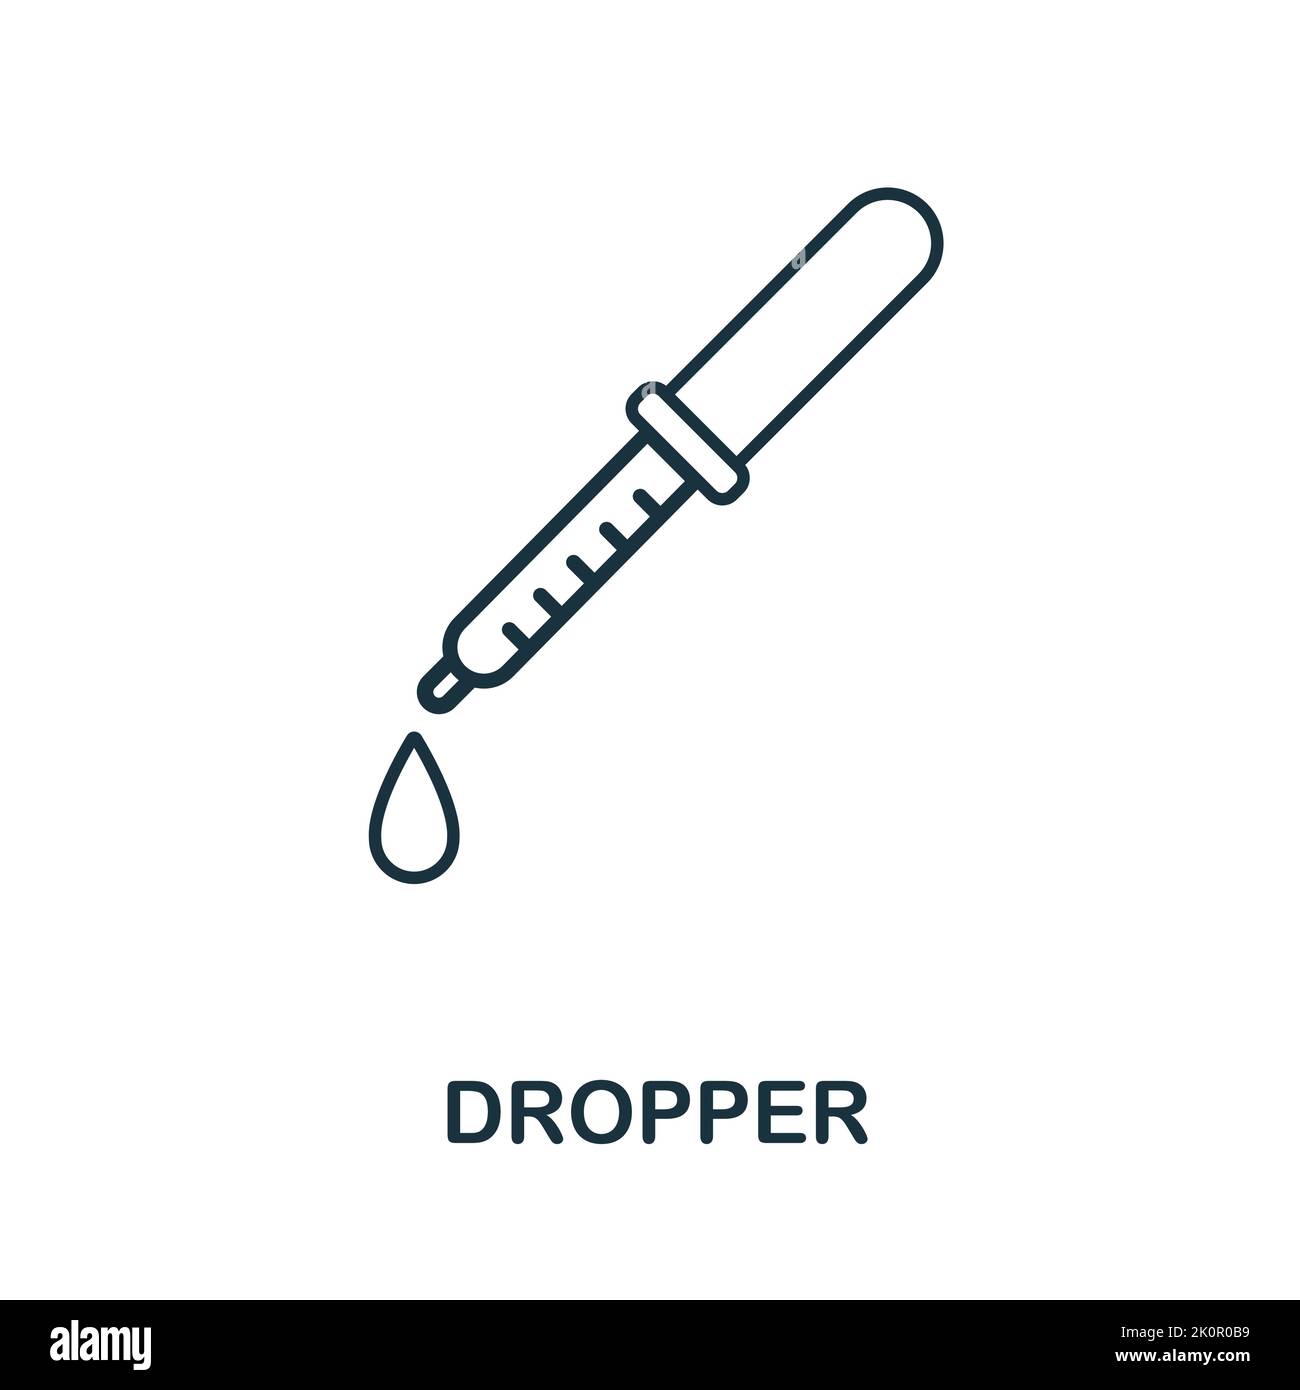 Dropper icon. Monocrome element from medical services collection. Dropper icon for banners, infographics and templates. Stock Vector